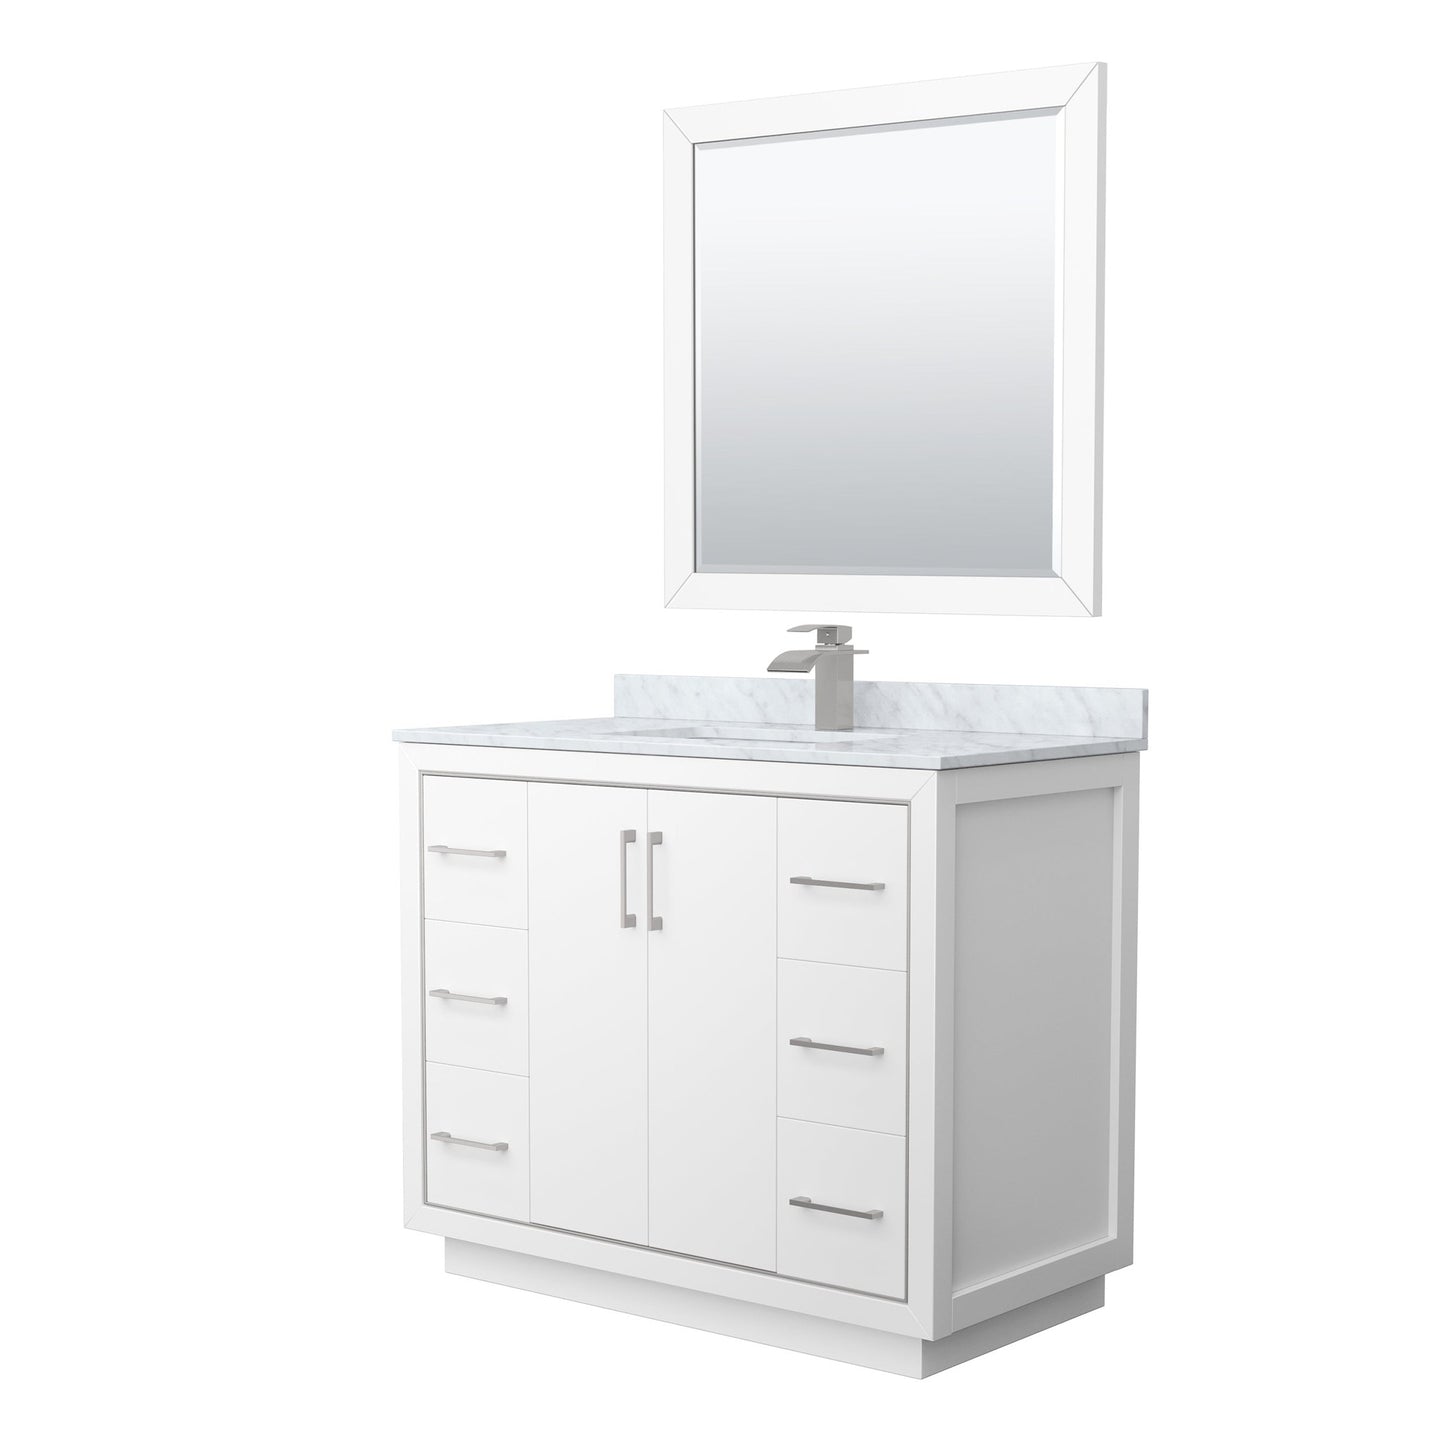 Wyndham Collection Icon 42" Single Bathroom Vanity in White, White Carrara Marble Countertop, Undermount Square Sink, Brushed Nickel Trim, 34" Mirror